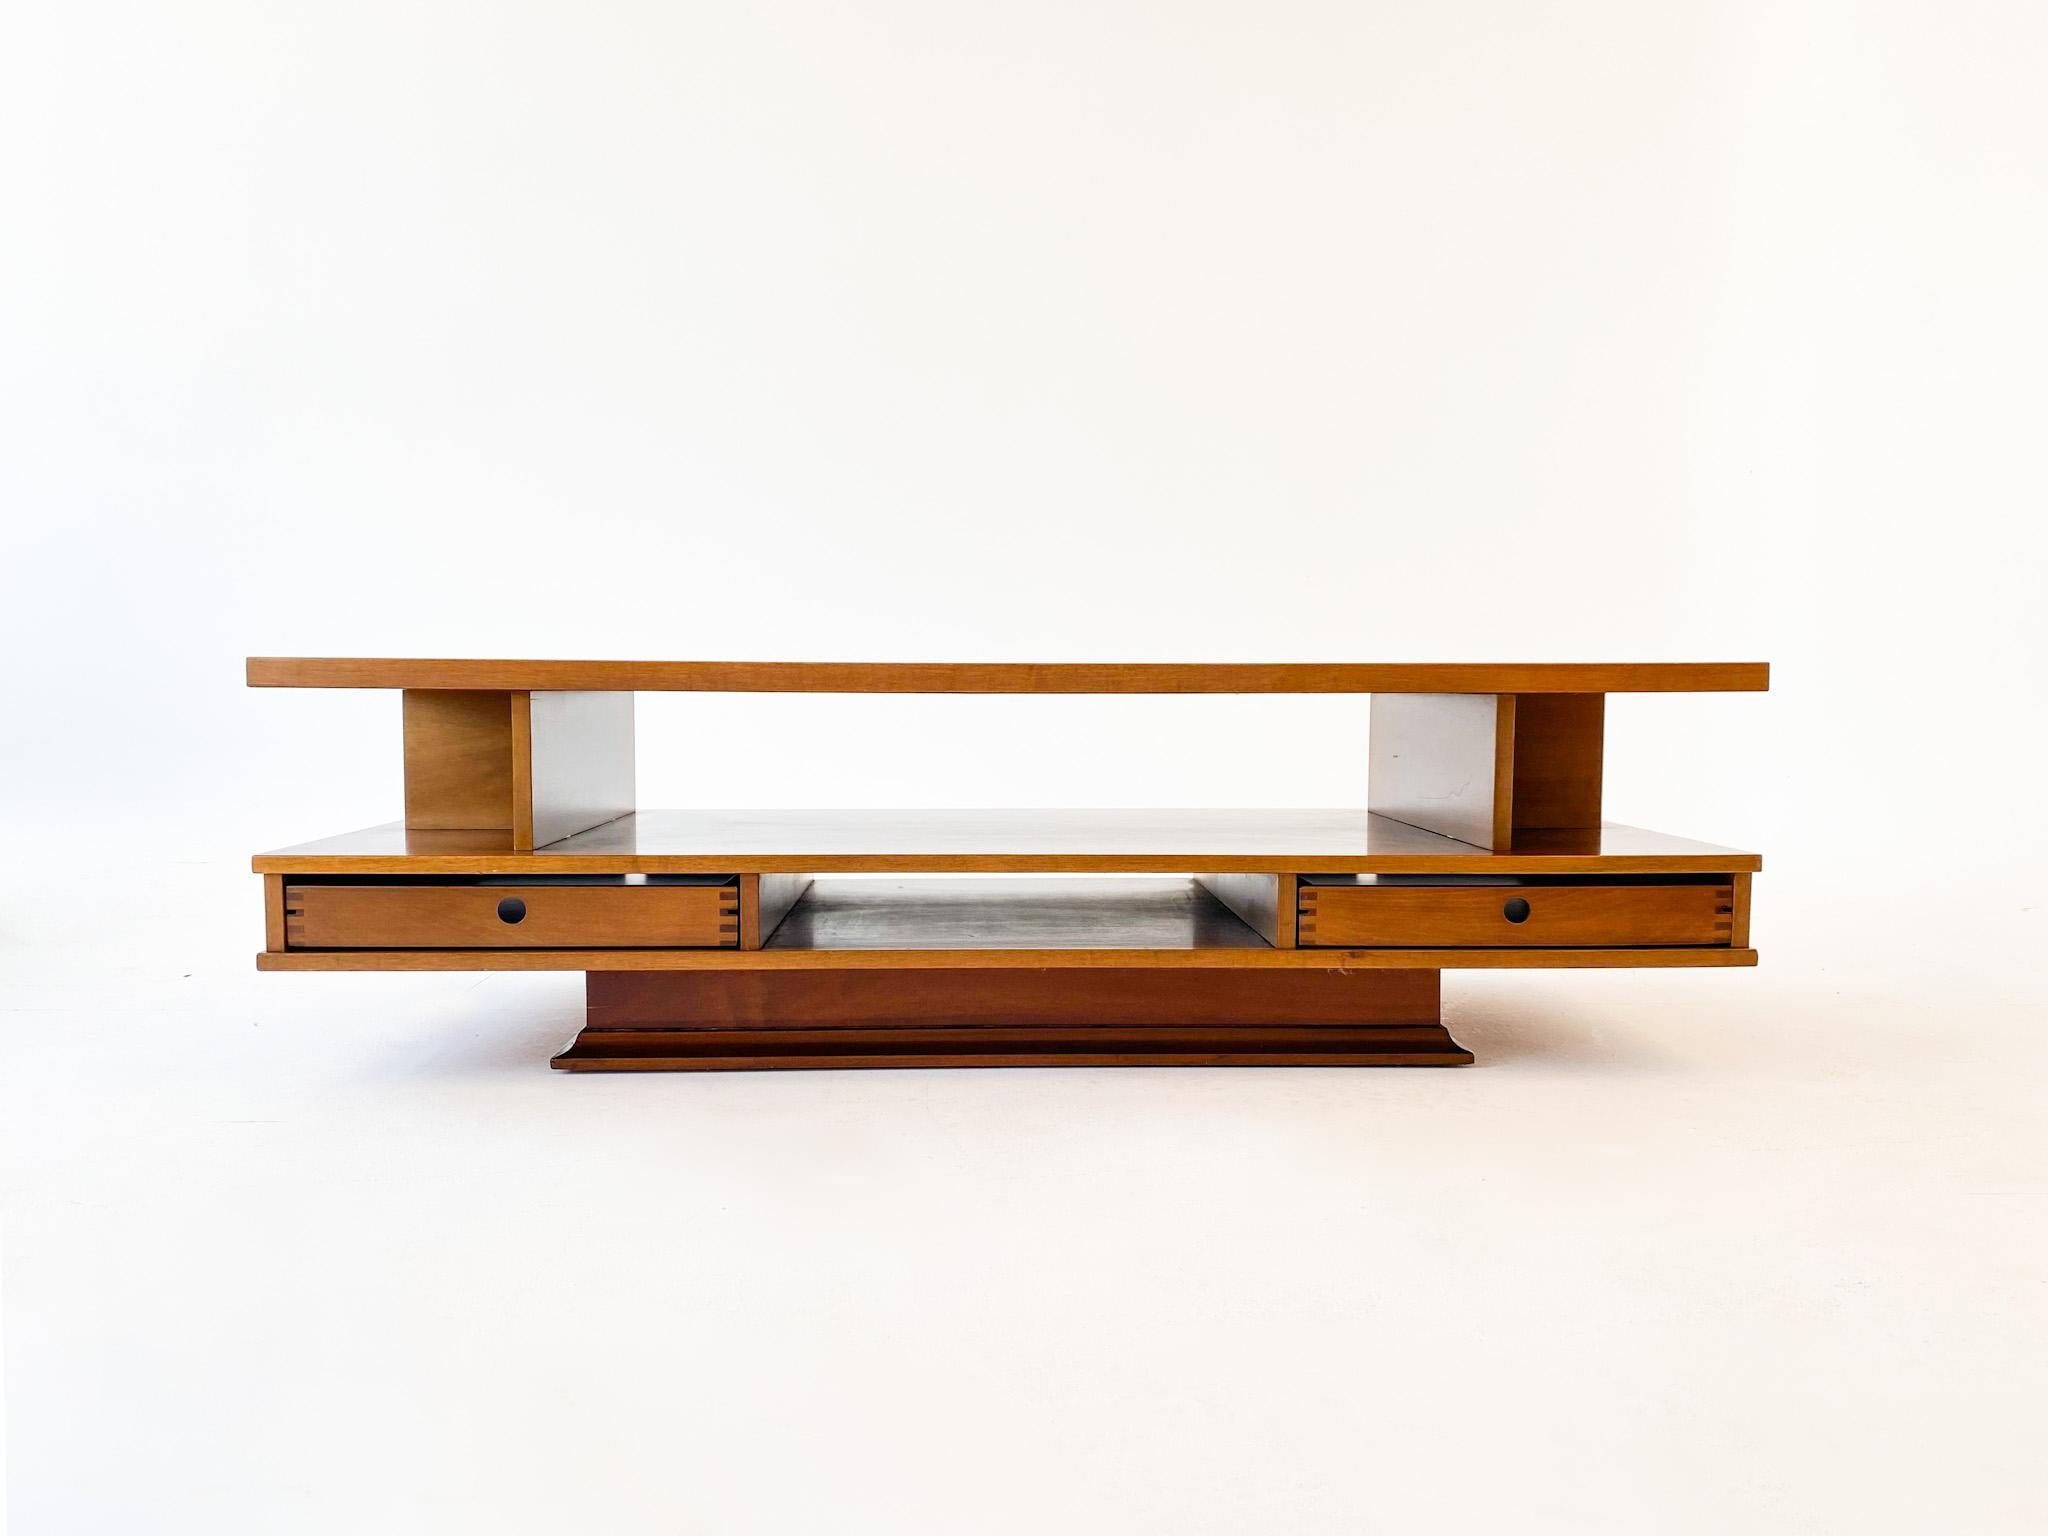 Italian Mid-Century Modern Wooden Coffee Table by Claudio Salocchi for Sormani, 1960s